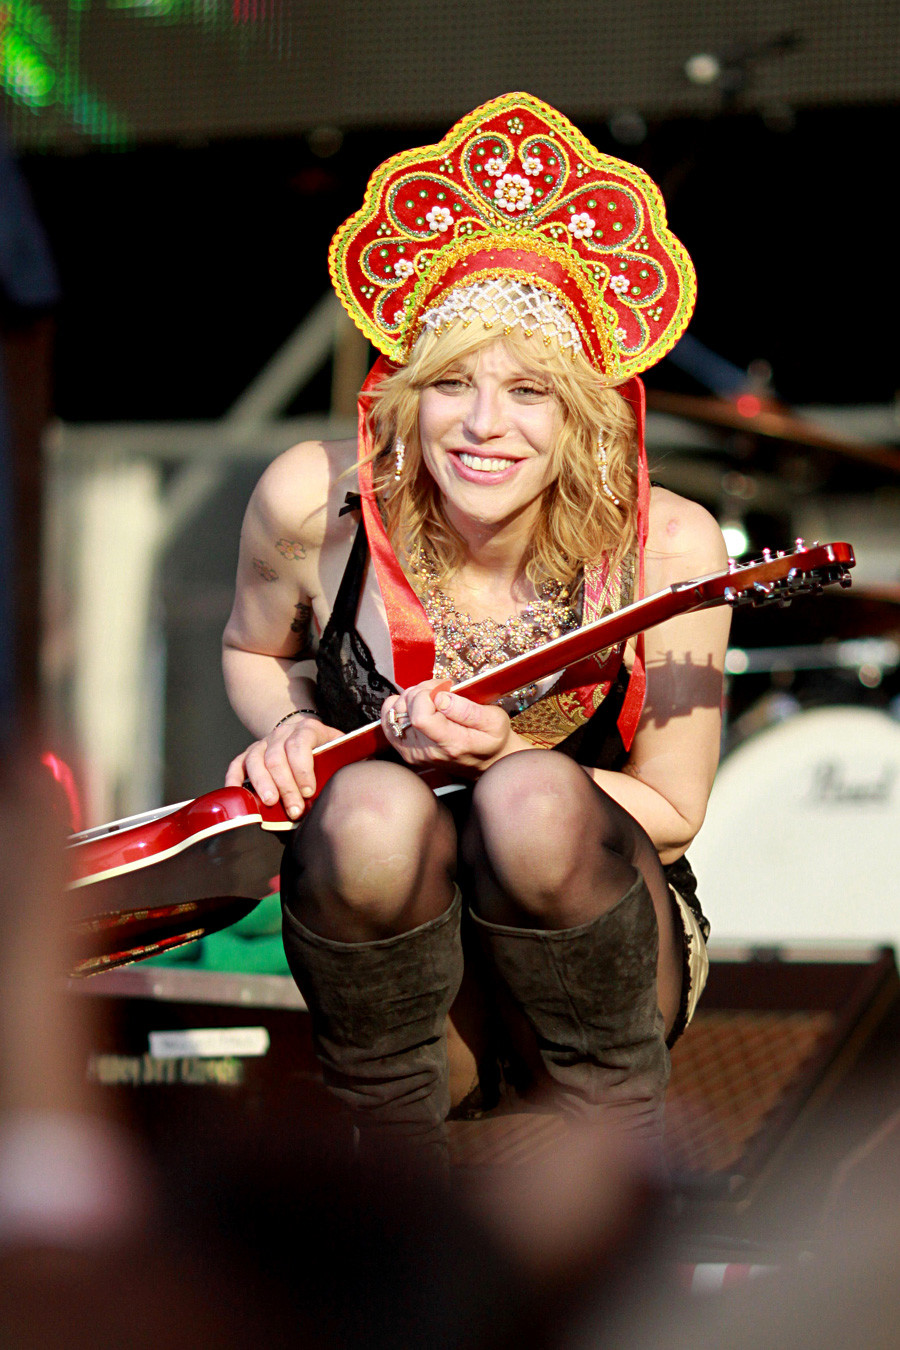 Courtney Love performing at Afisha Picnic music festival in Moscow